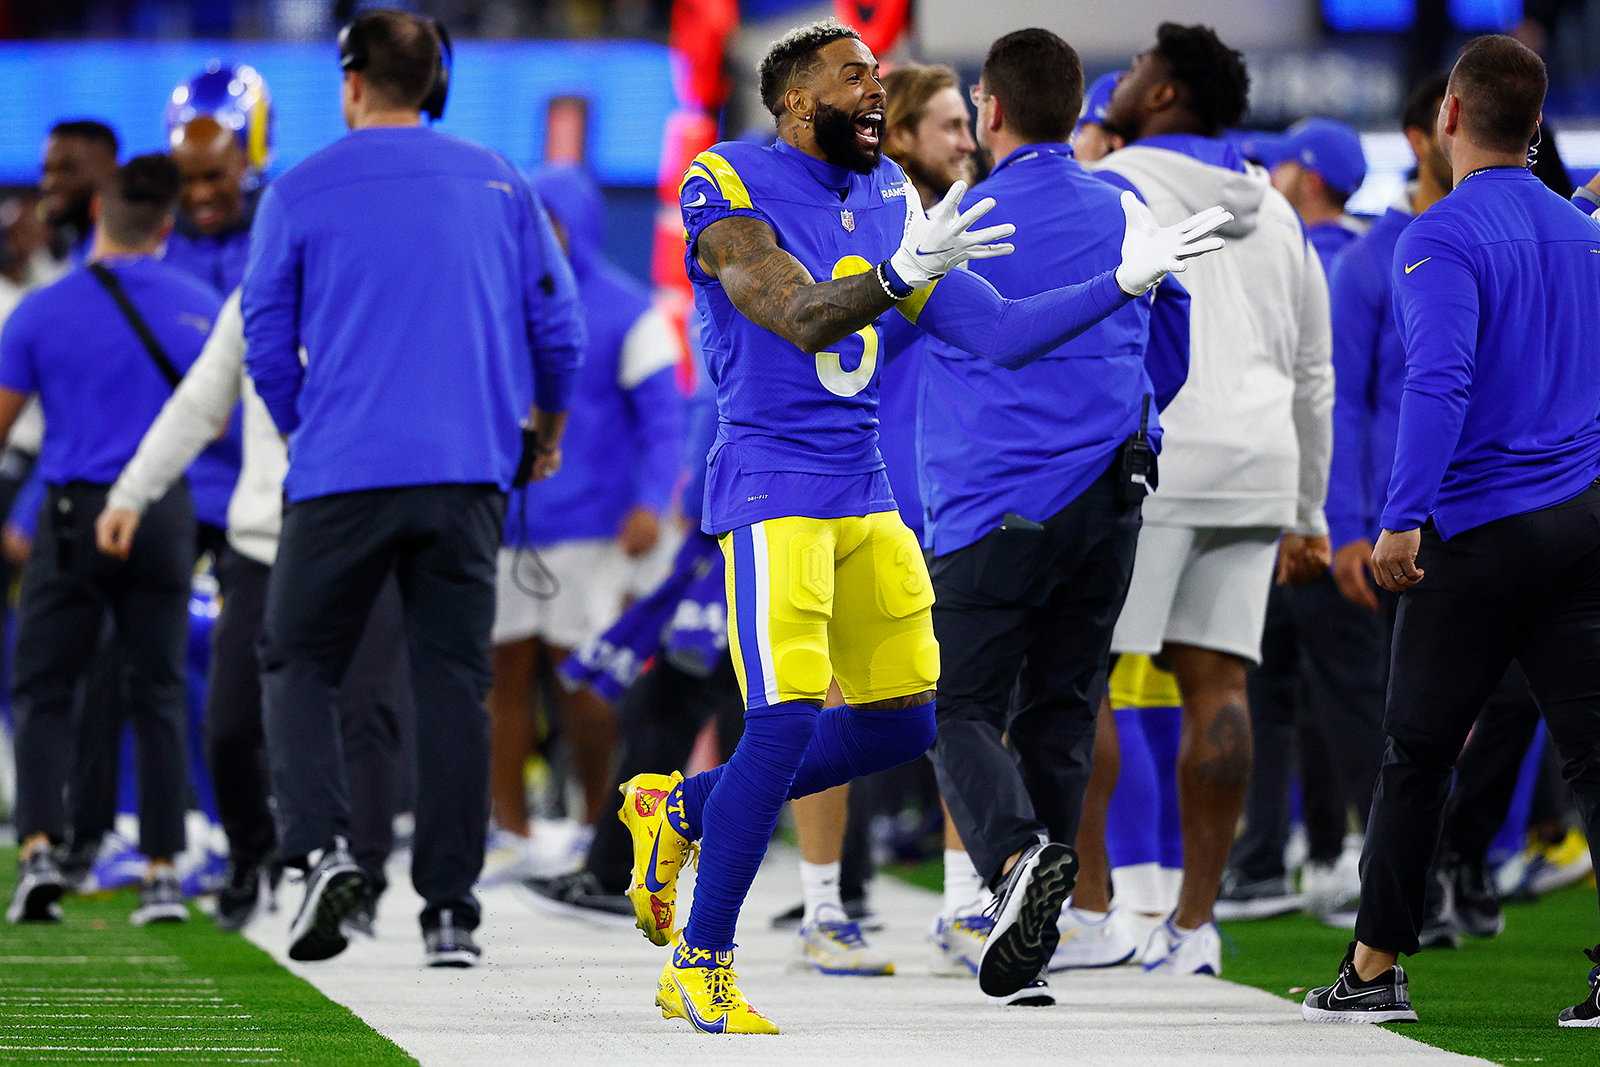 Odell Beckham Jr. #3 of the Los Angeles Rams reacts in the final moments of the fourth quarter against the San Francisco 49ers in the NFC Championship Game at SoFi Stadium on January 30, in Inglewood, California.